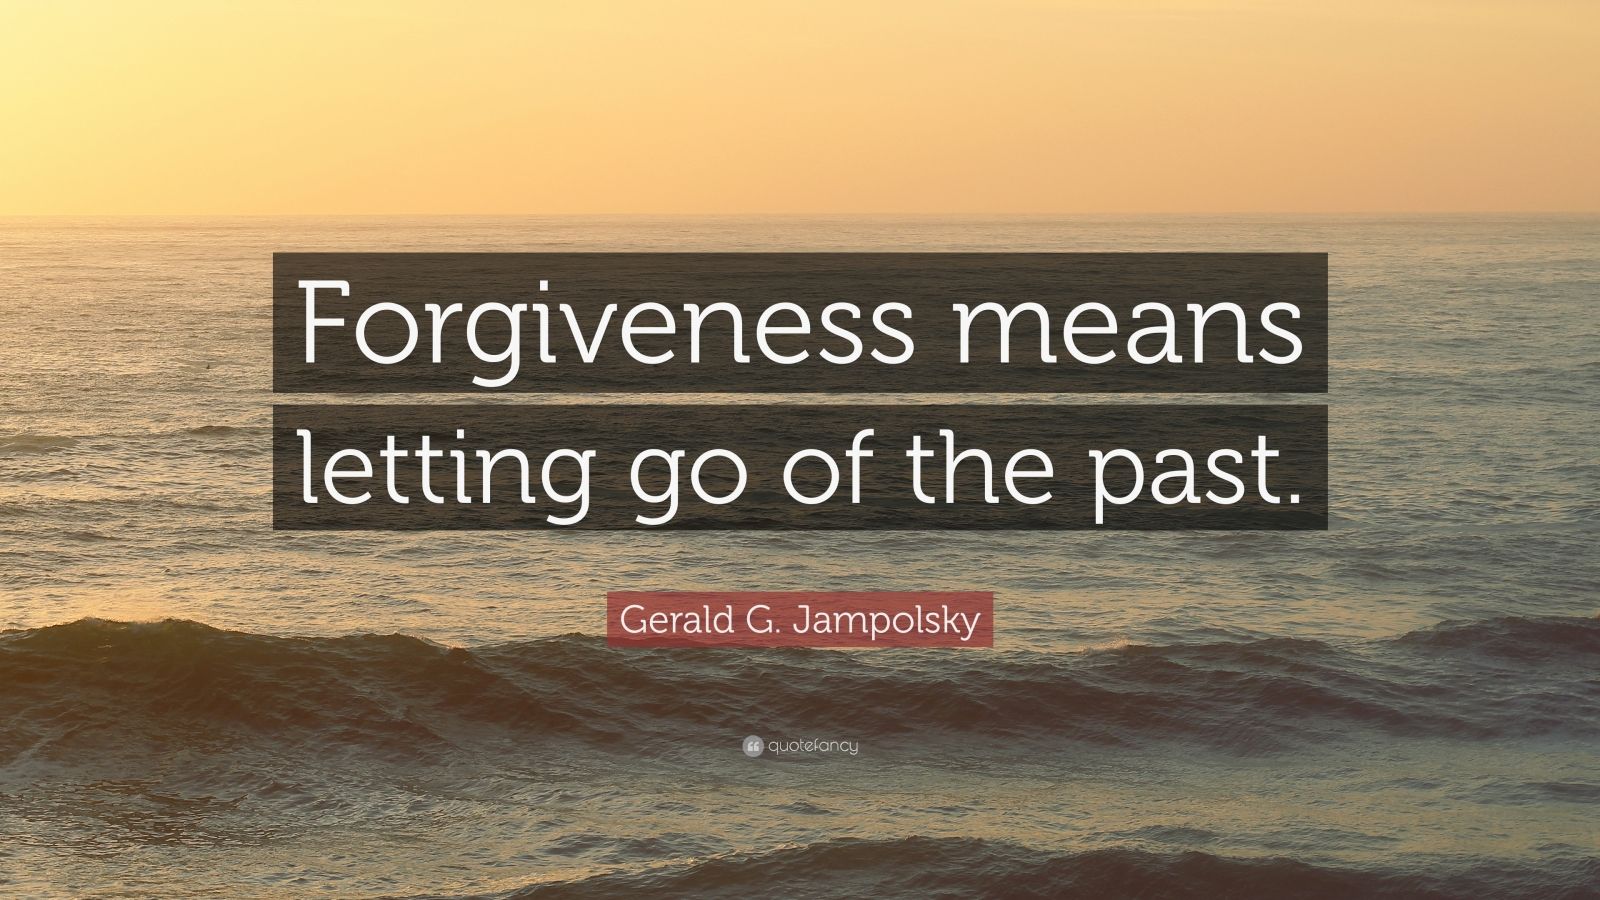 Gerald G. Jampolsky Quote: “Forgiveness means letting go of the past